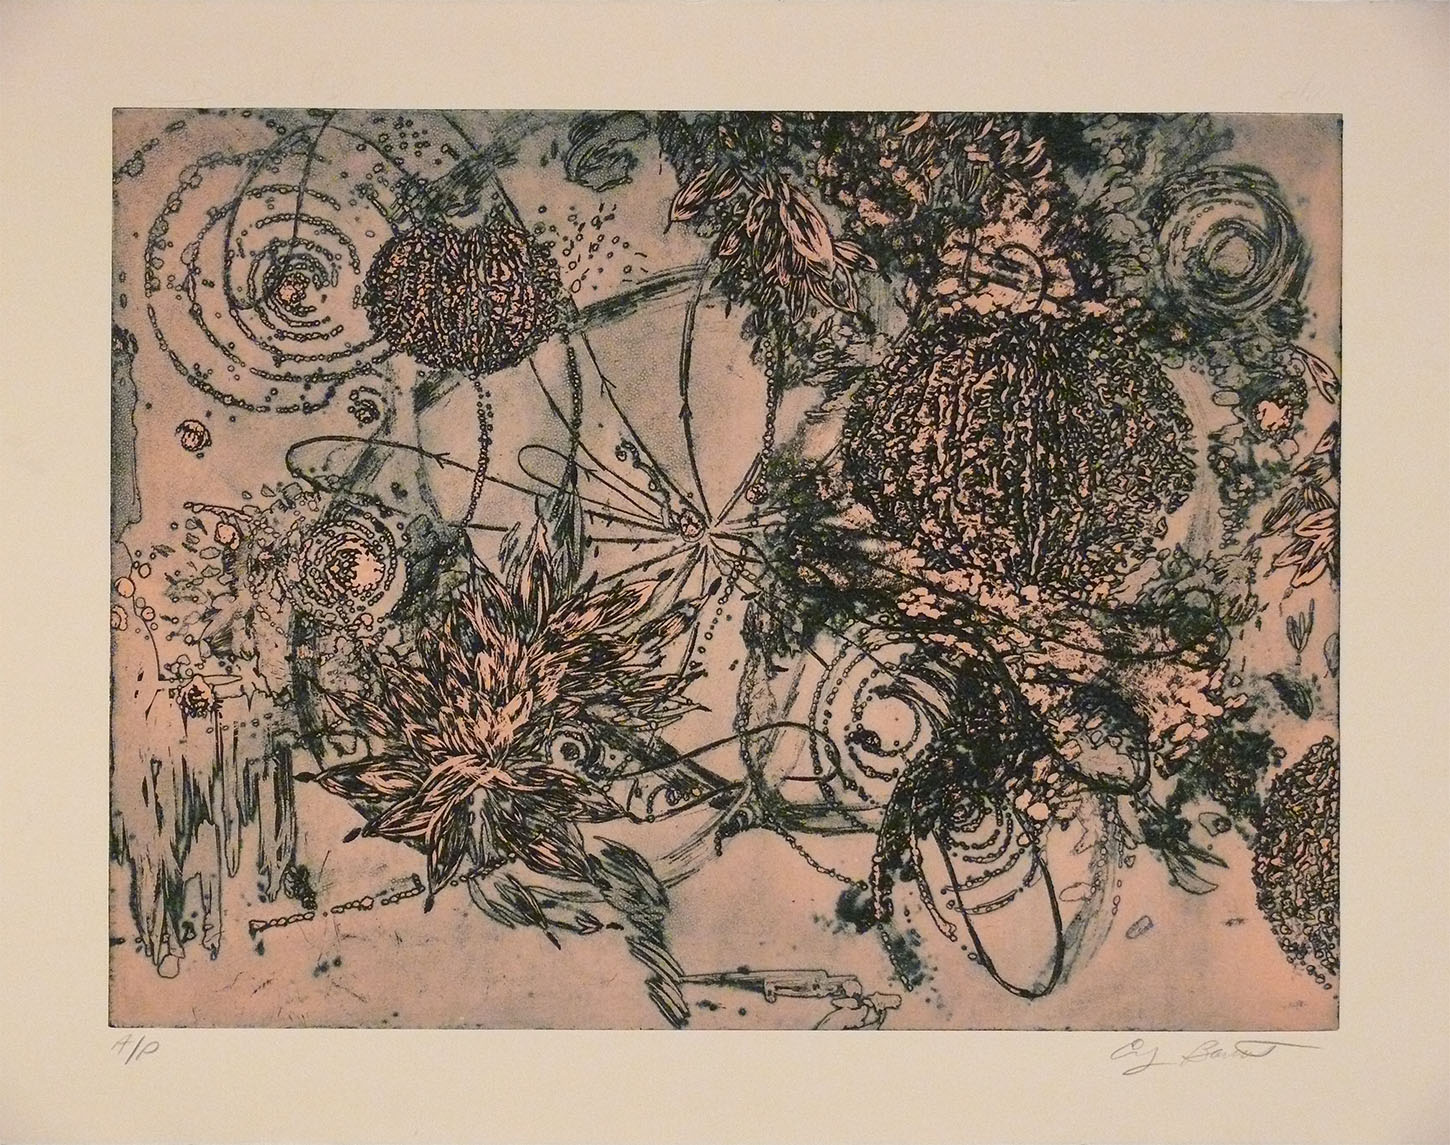  Microcosms, Pink, 2005, Viscosity Etching, 22 x 30 